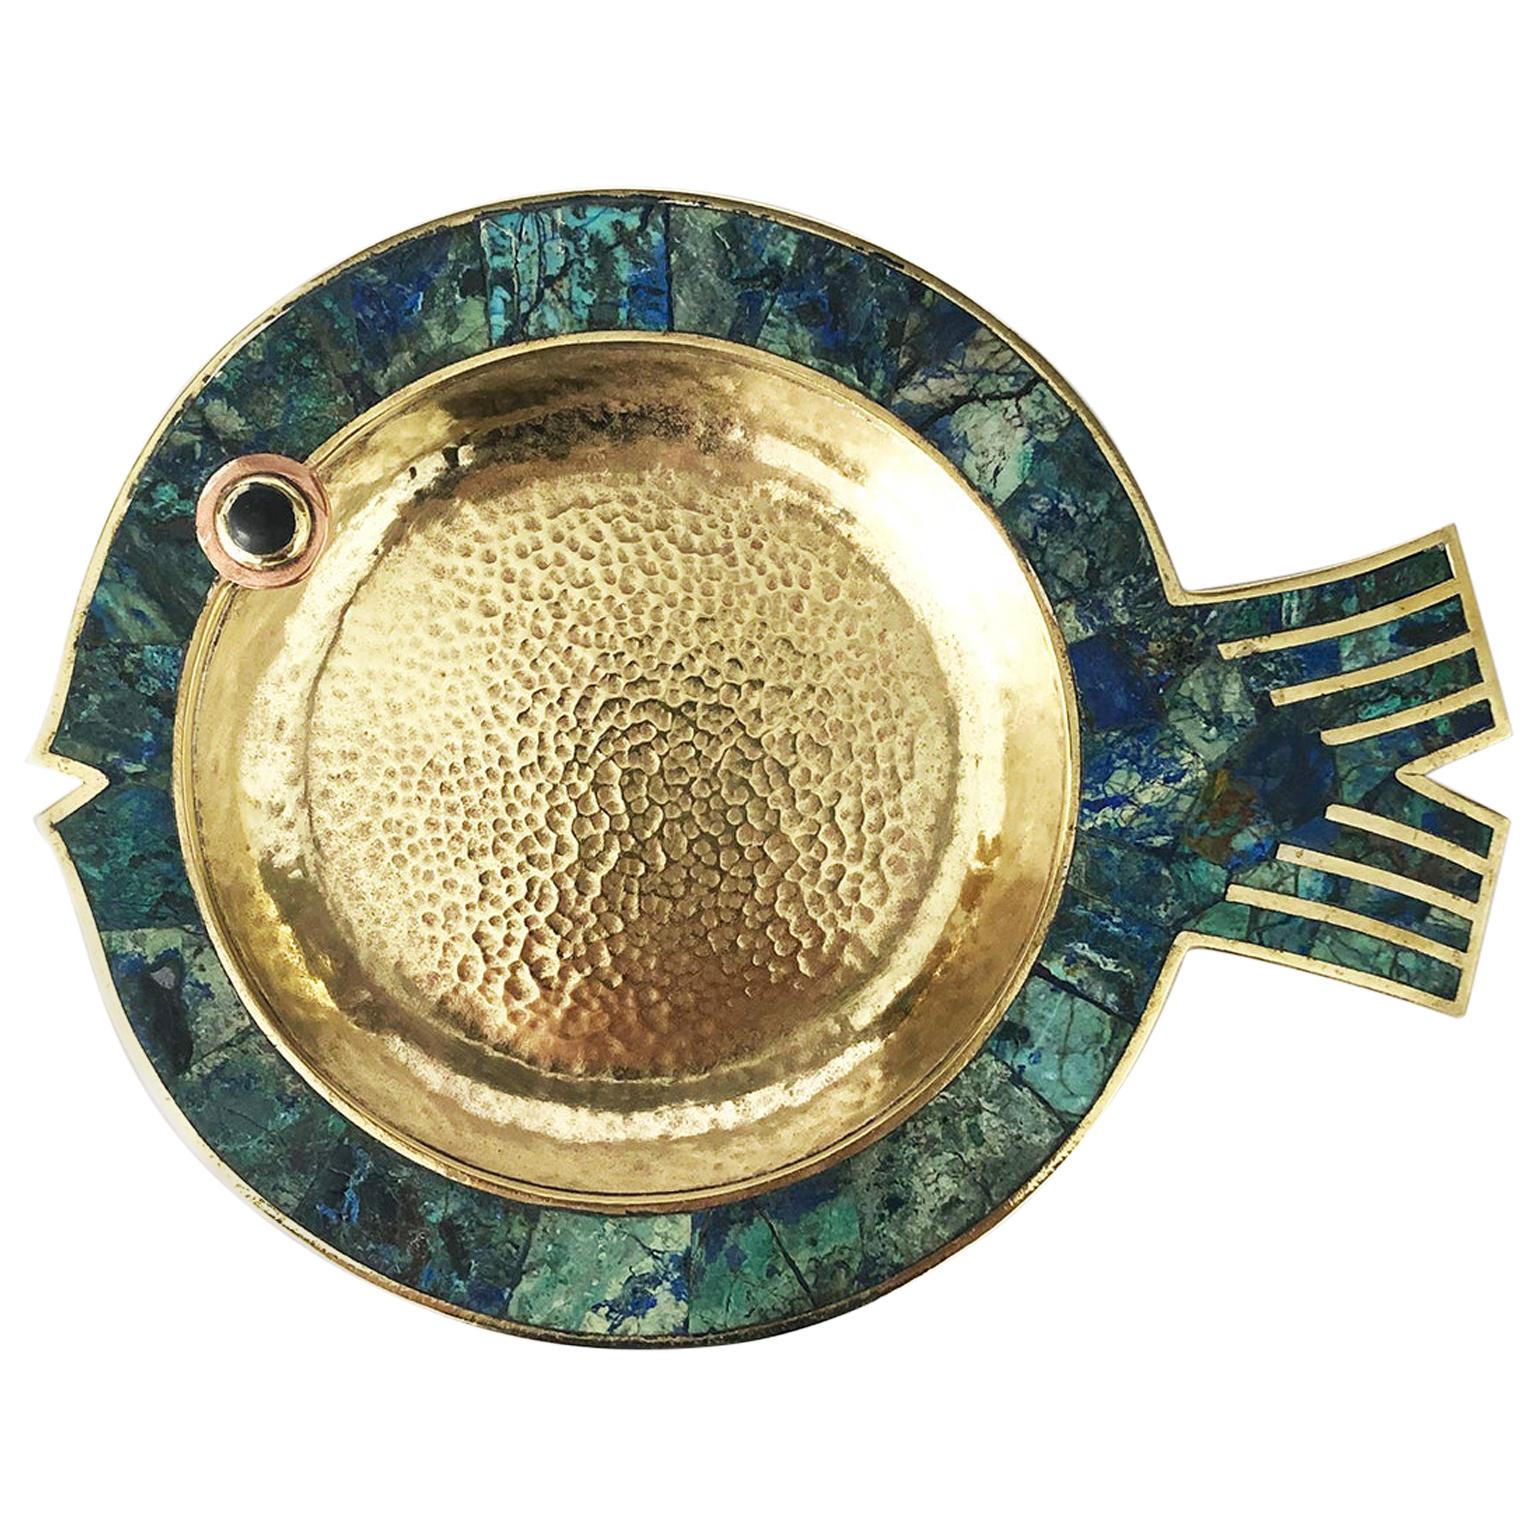 Fantastic Turquoise Dish in Fish Form by Los Castillo